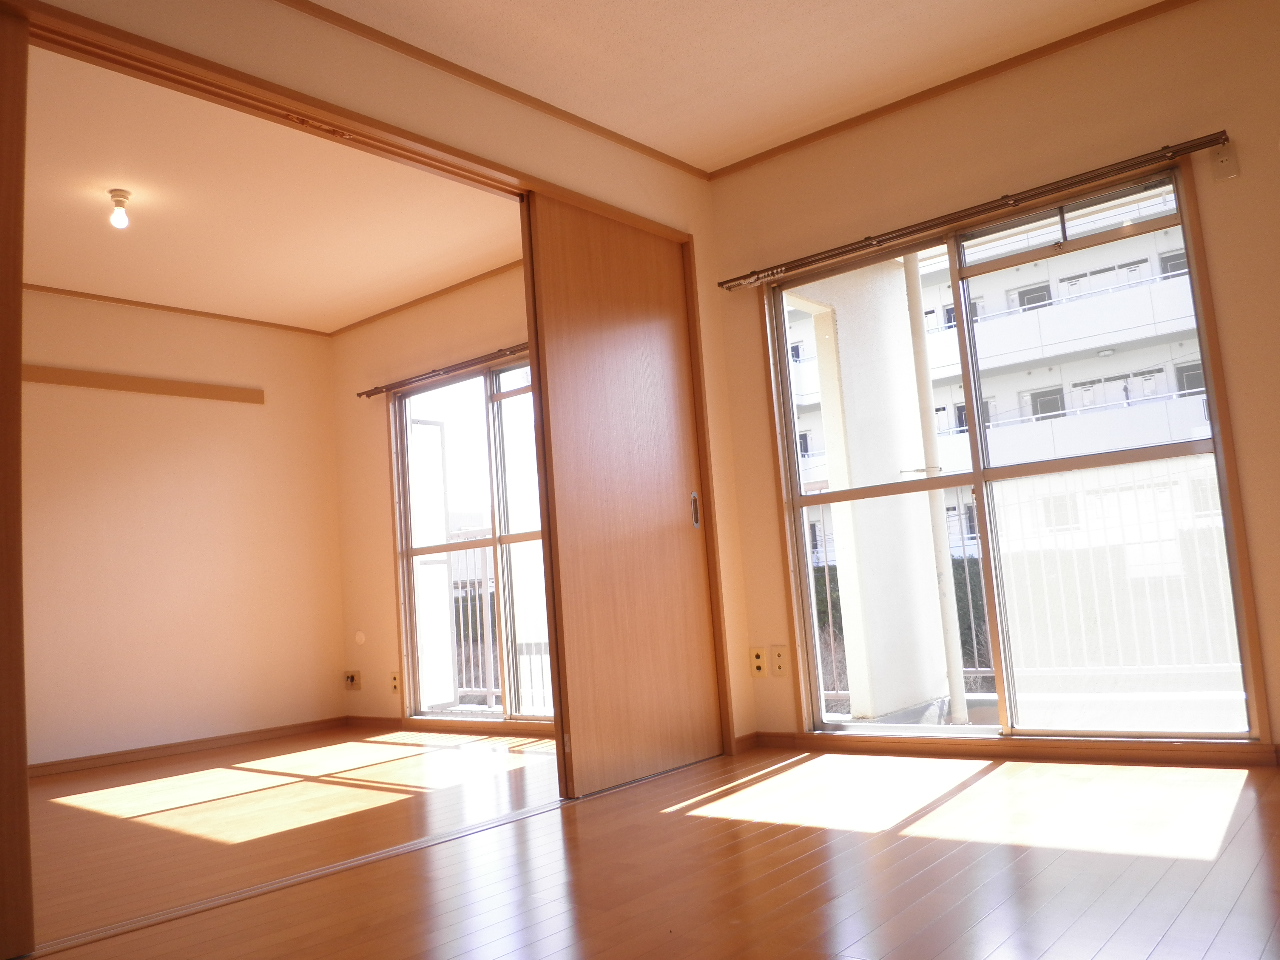 Living and room. You can use To spacious open the partition (No. 203 room photos)